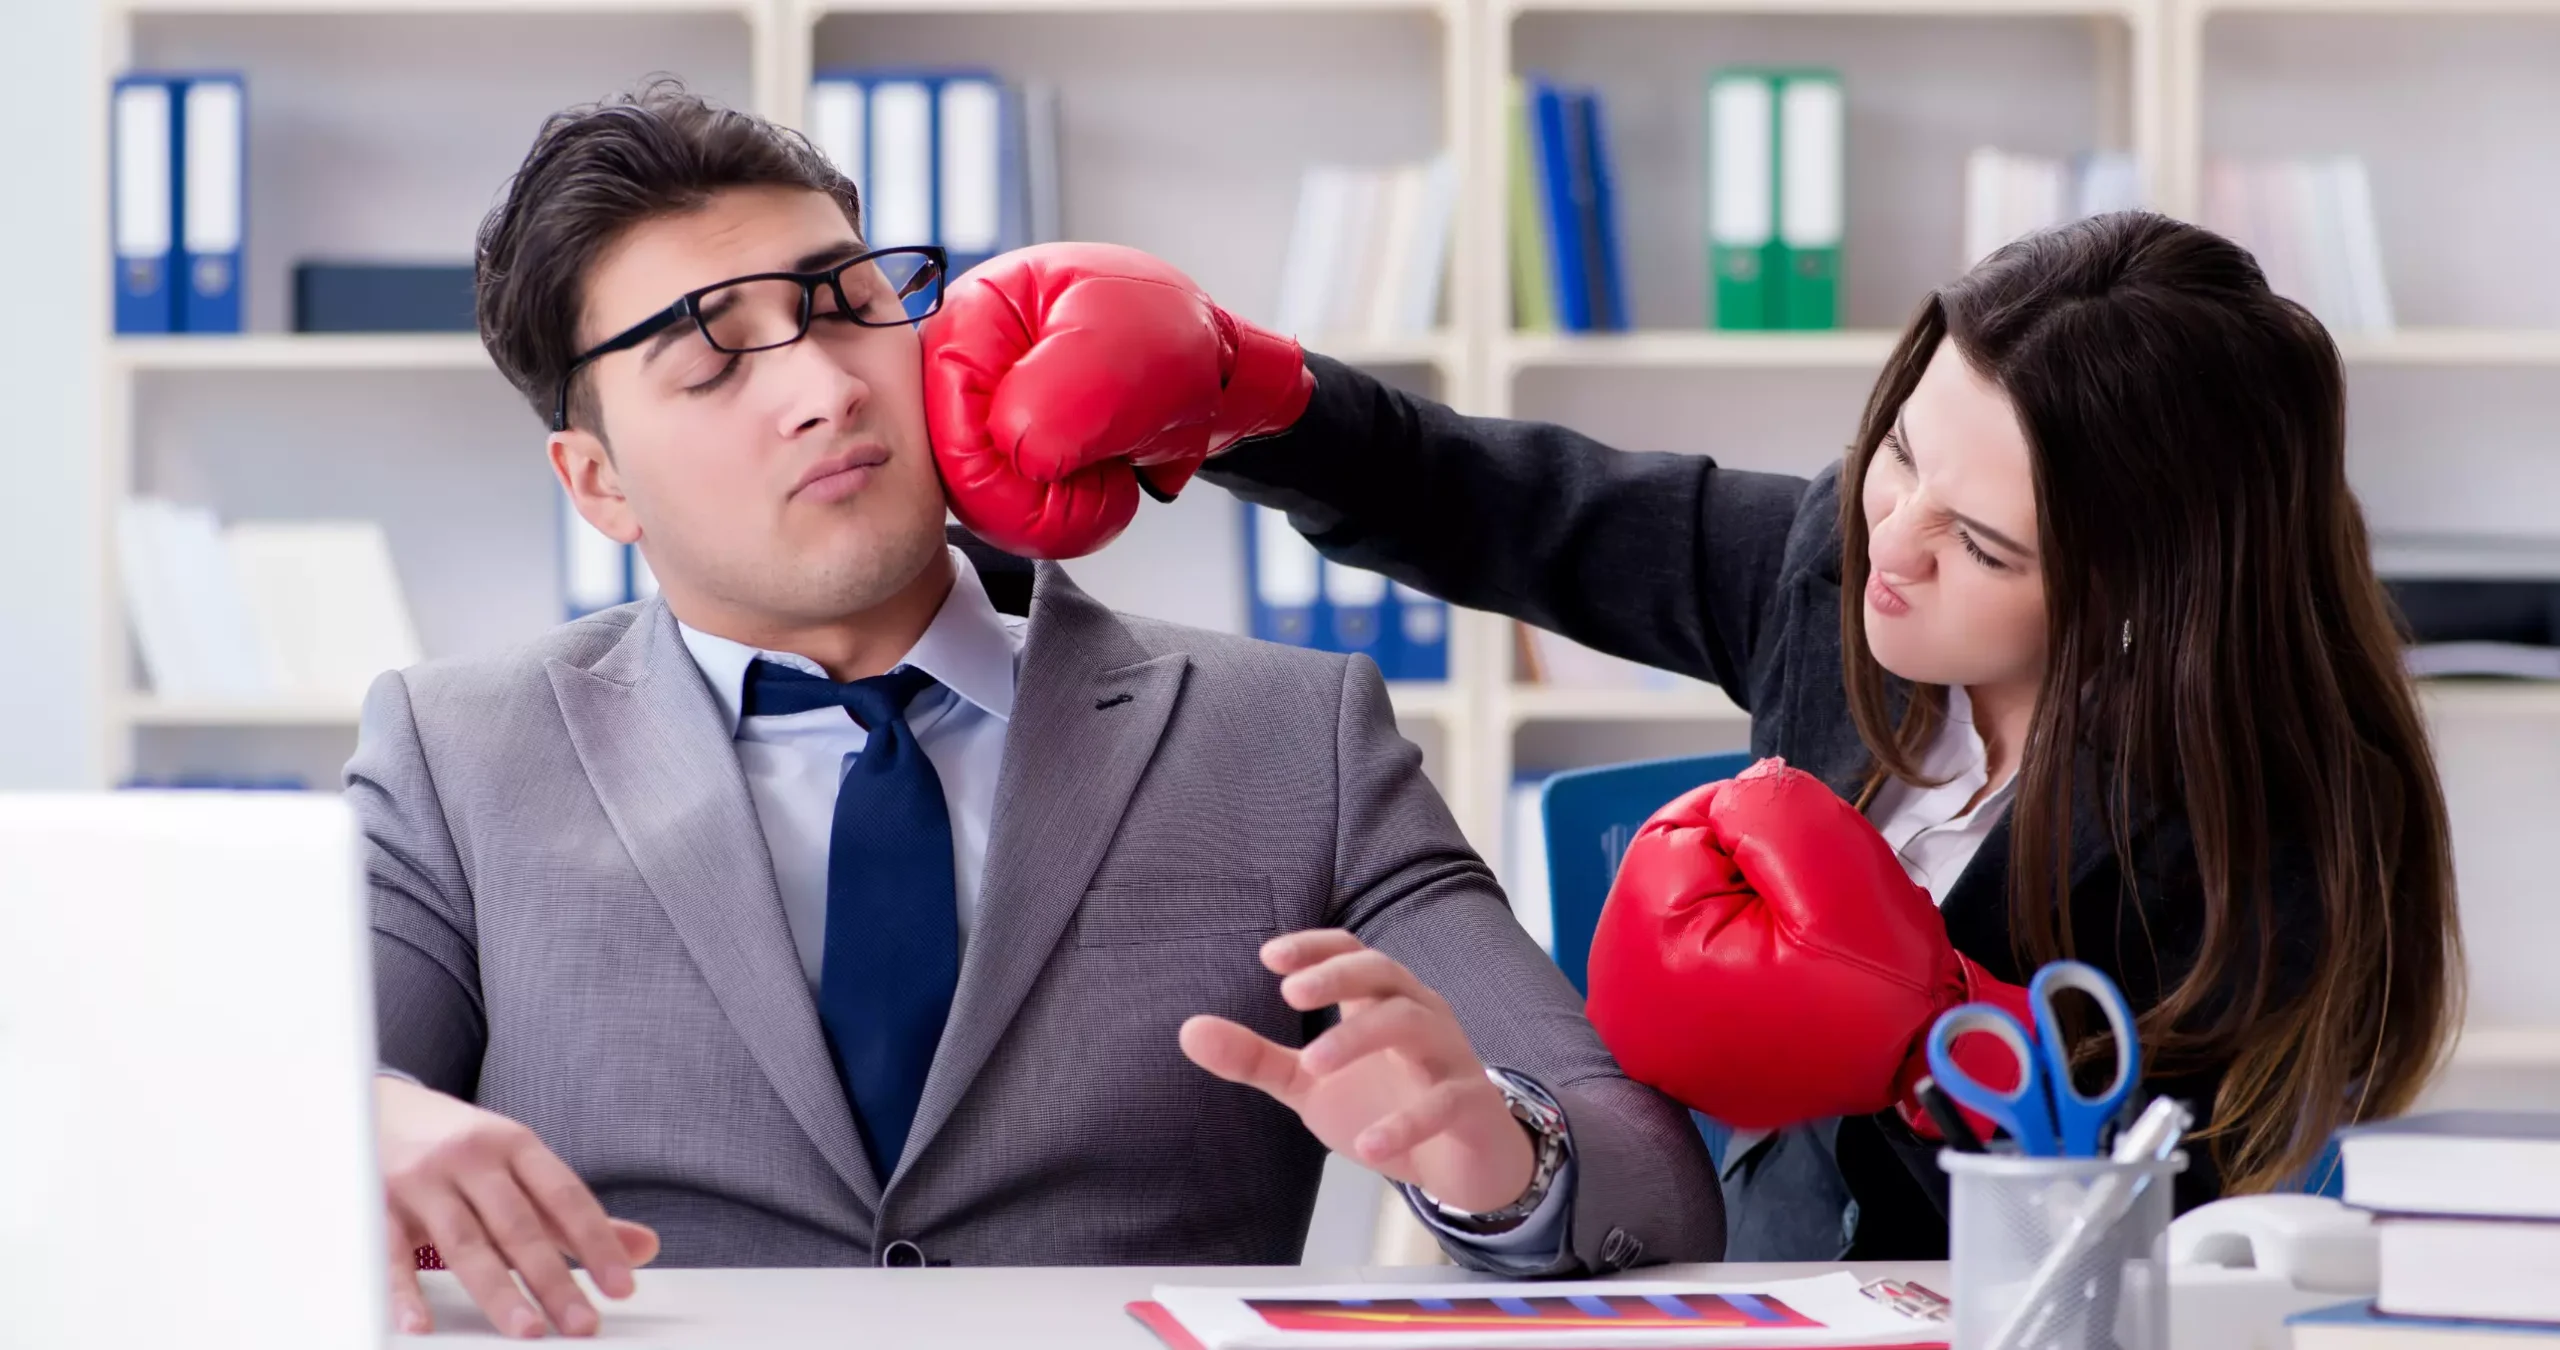 Managing Workplace Conflict